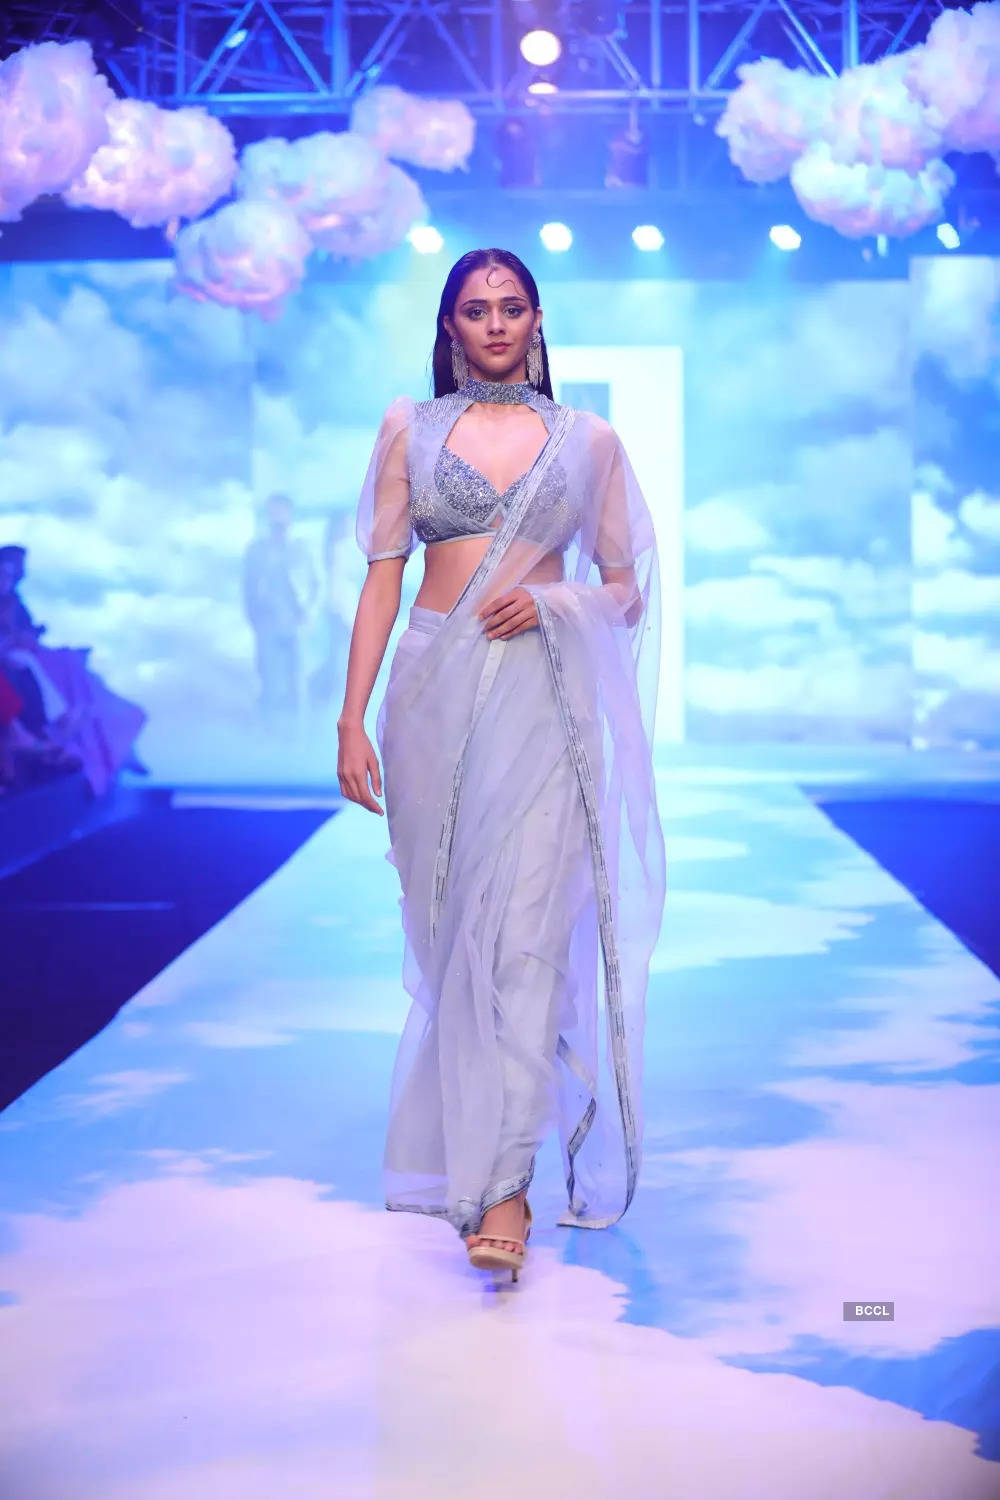 Know more about the fascinating journey of fashion designer Disha Vadgama